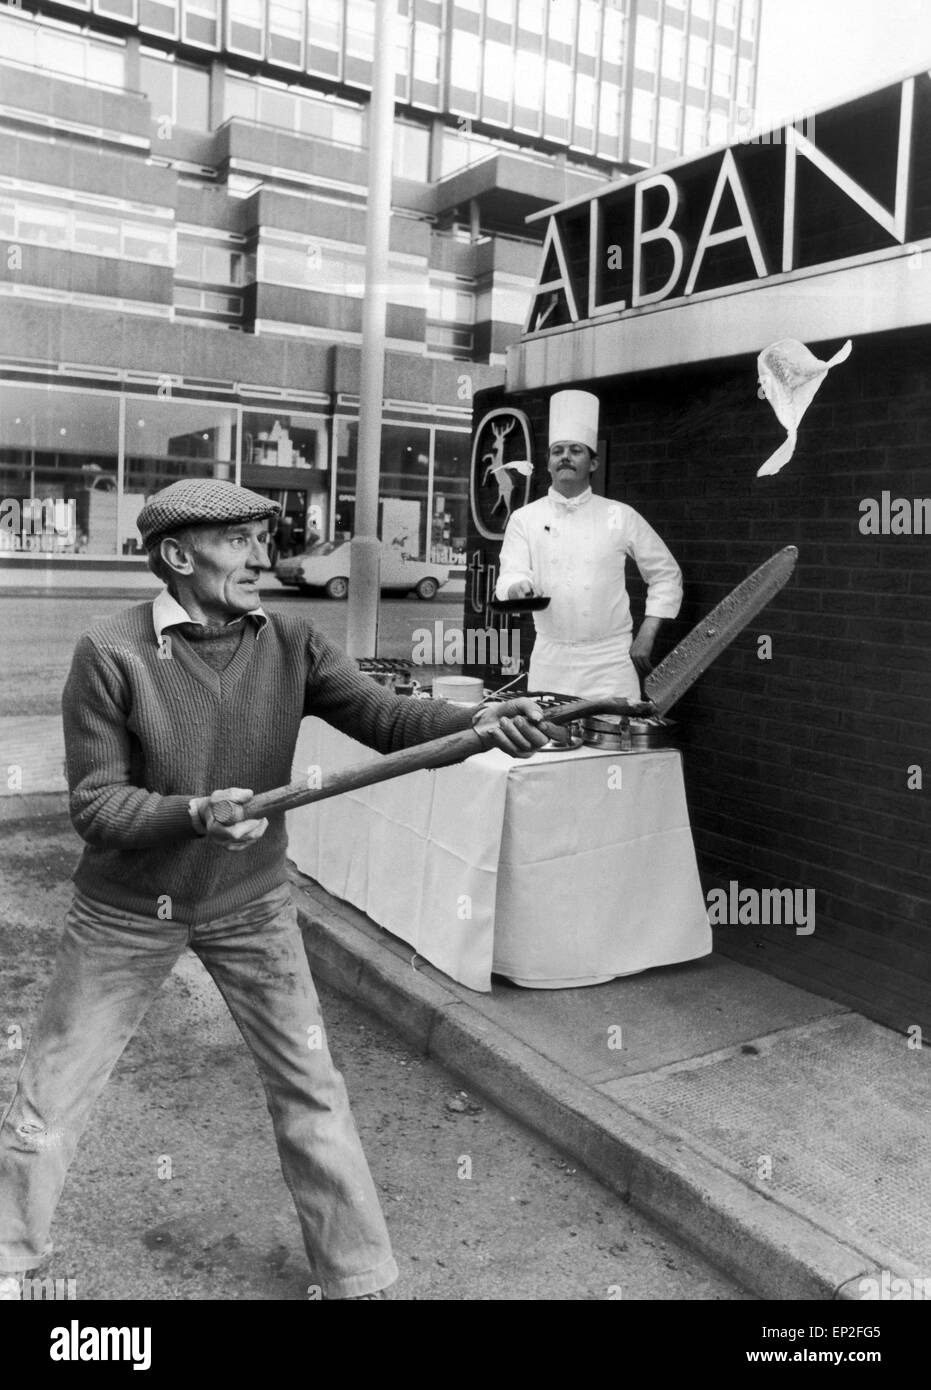 Chef Frank Boggie of the Albany Hotel, Glasgow, Scotland, almost met his match when he cooked up Shrove Tuesday pancakes. Workman Willie Duffy reconed anything Frank could do, he could do better ... even with a shovel, 23rd February 1982. Stock Photo